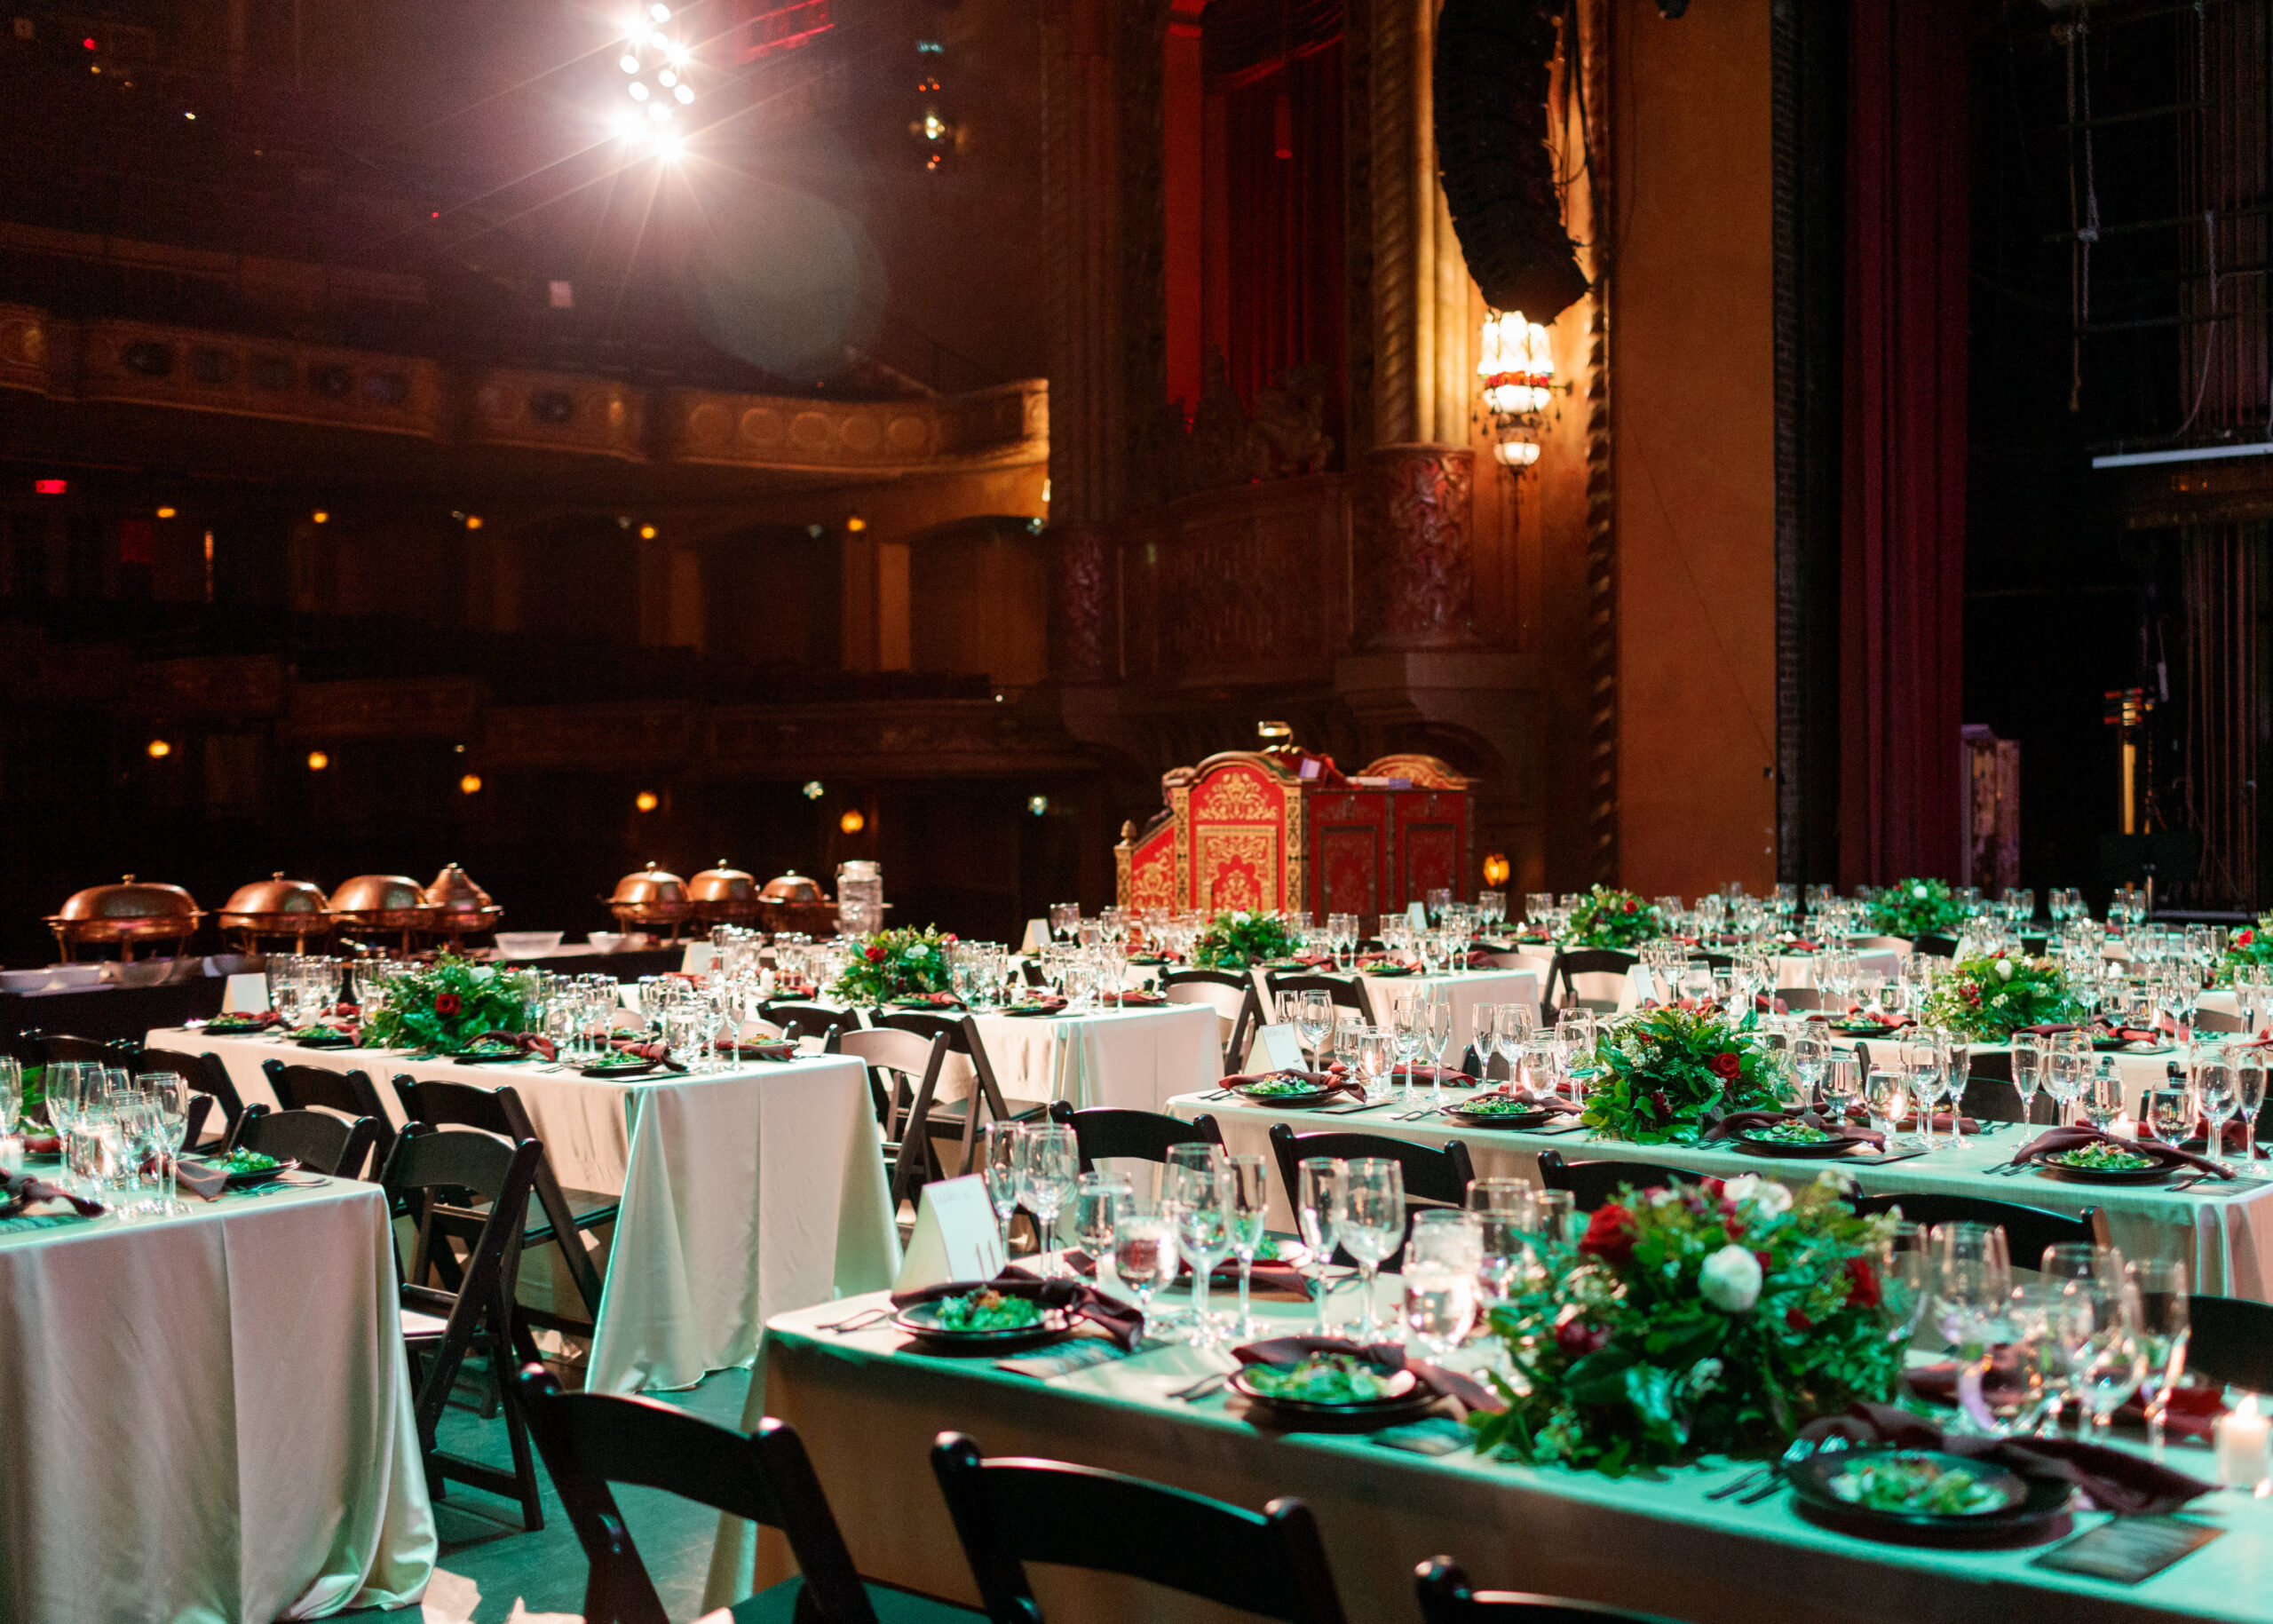 Rehearsal dinner on the stage at The Alabama Theatre